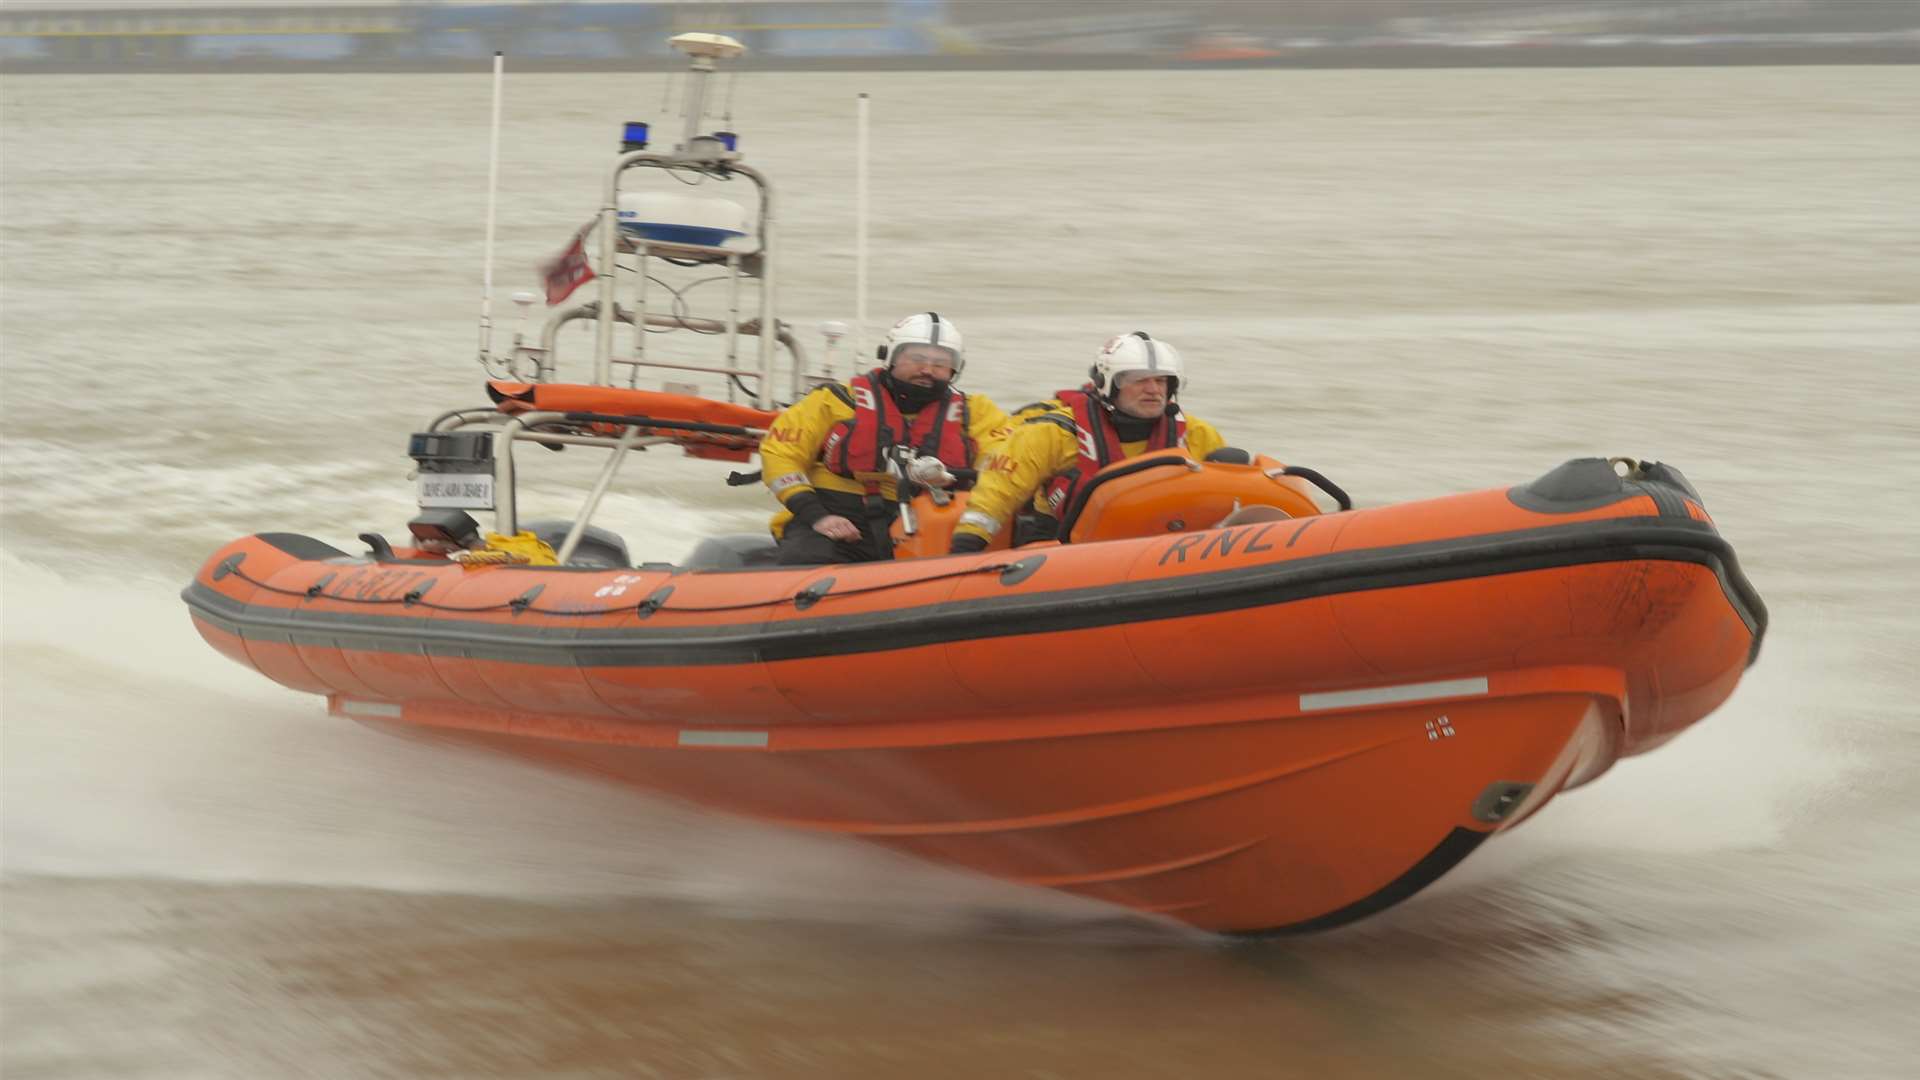 The RNLI lifeboat launching at Gravesend